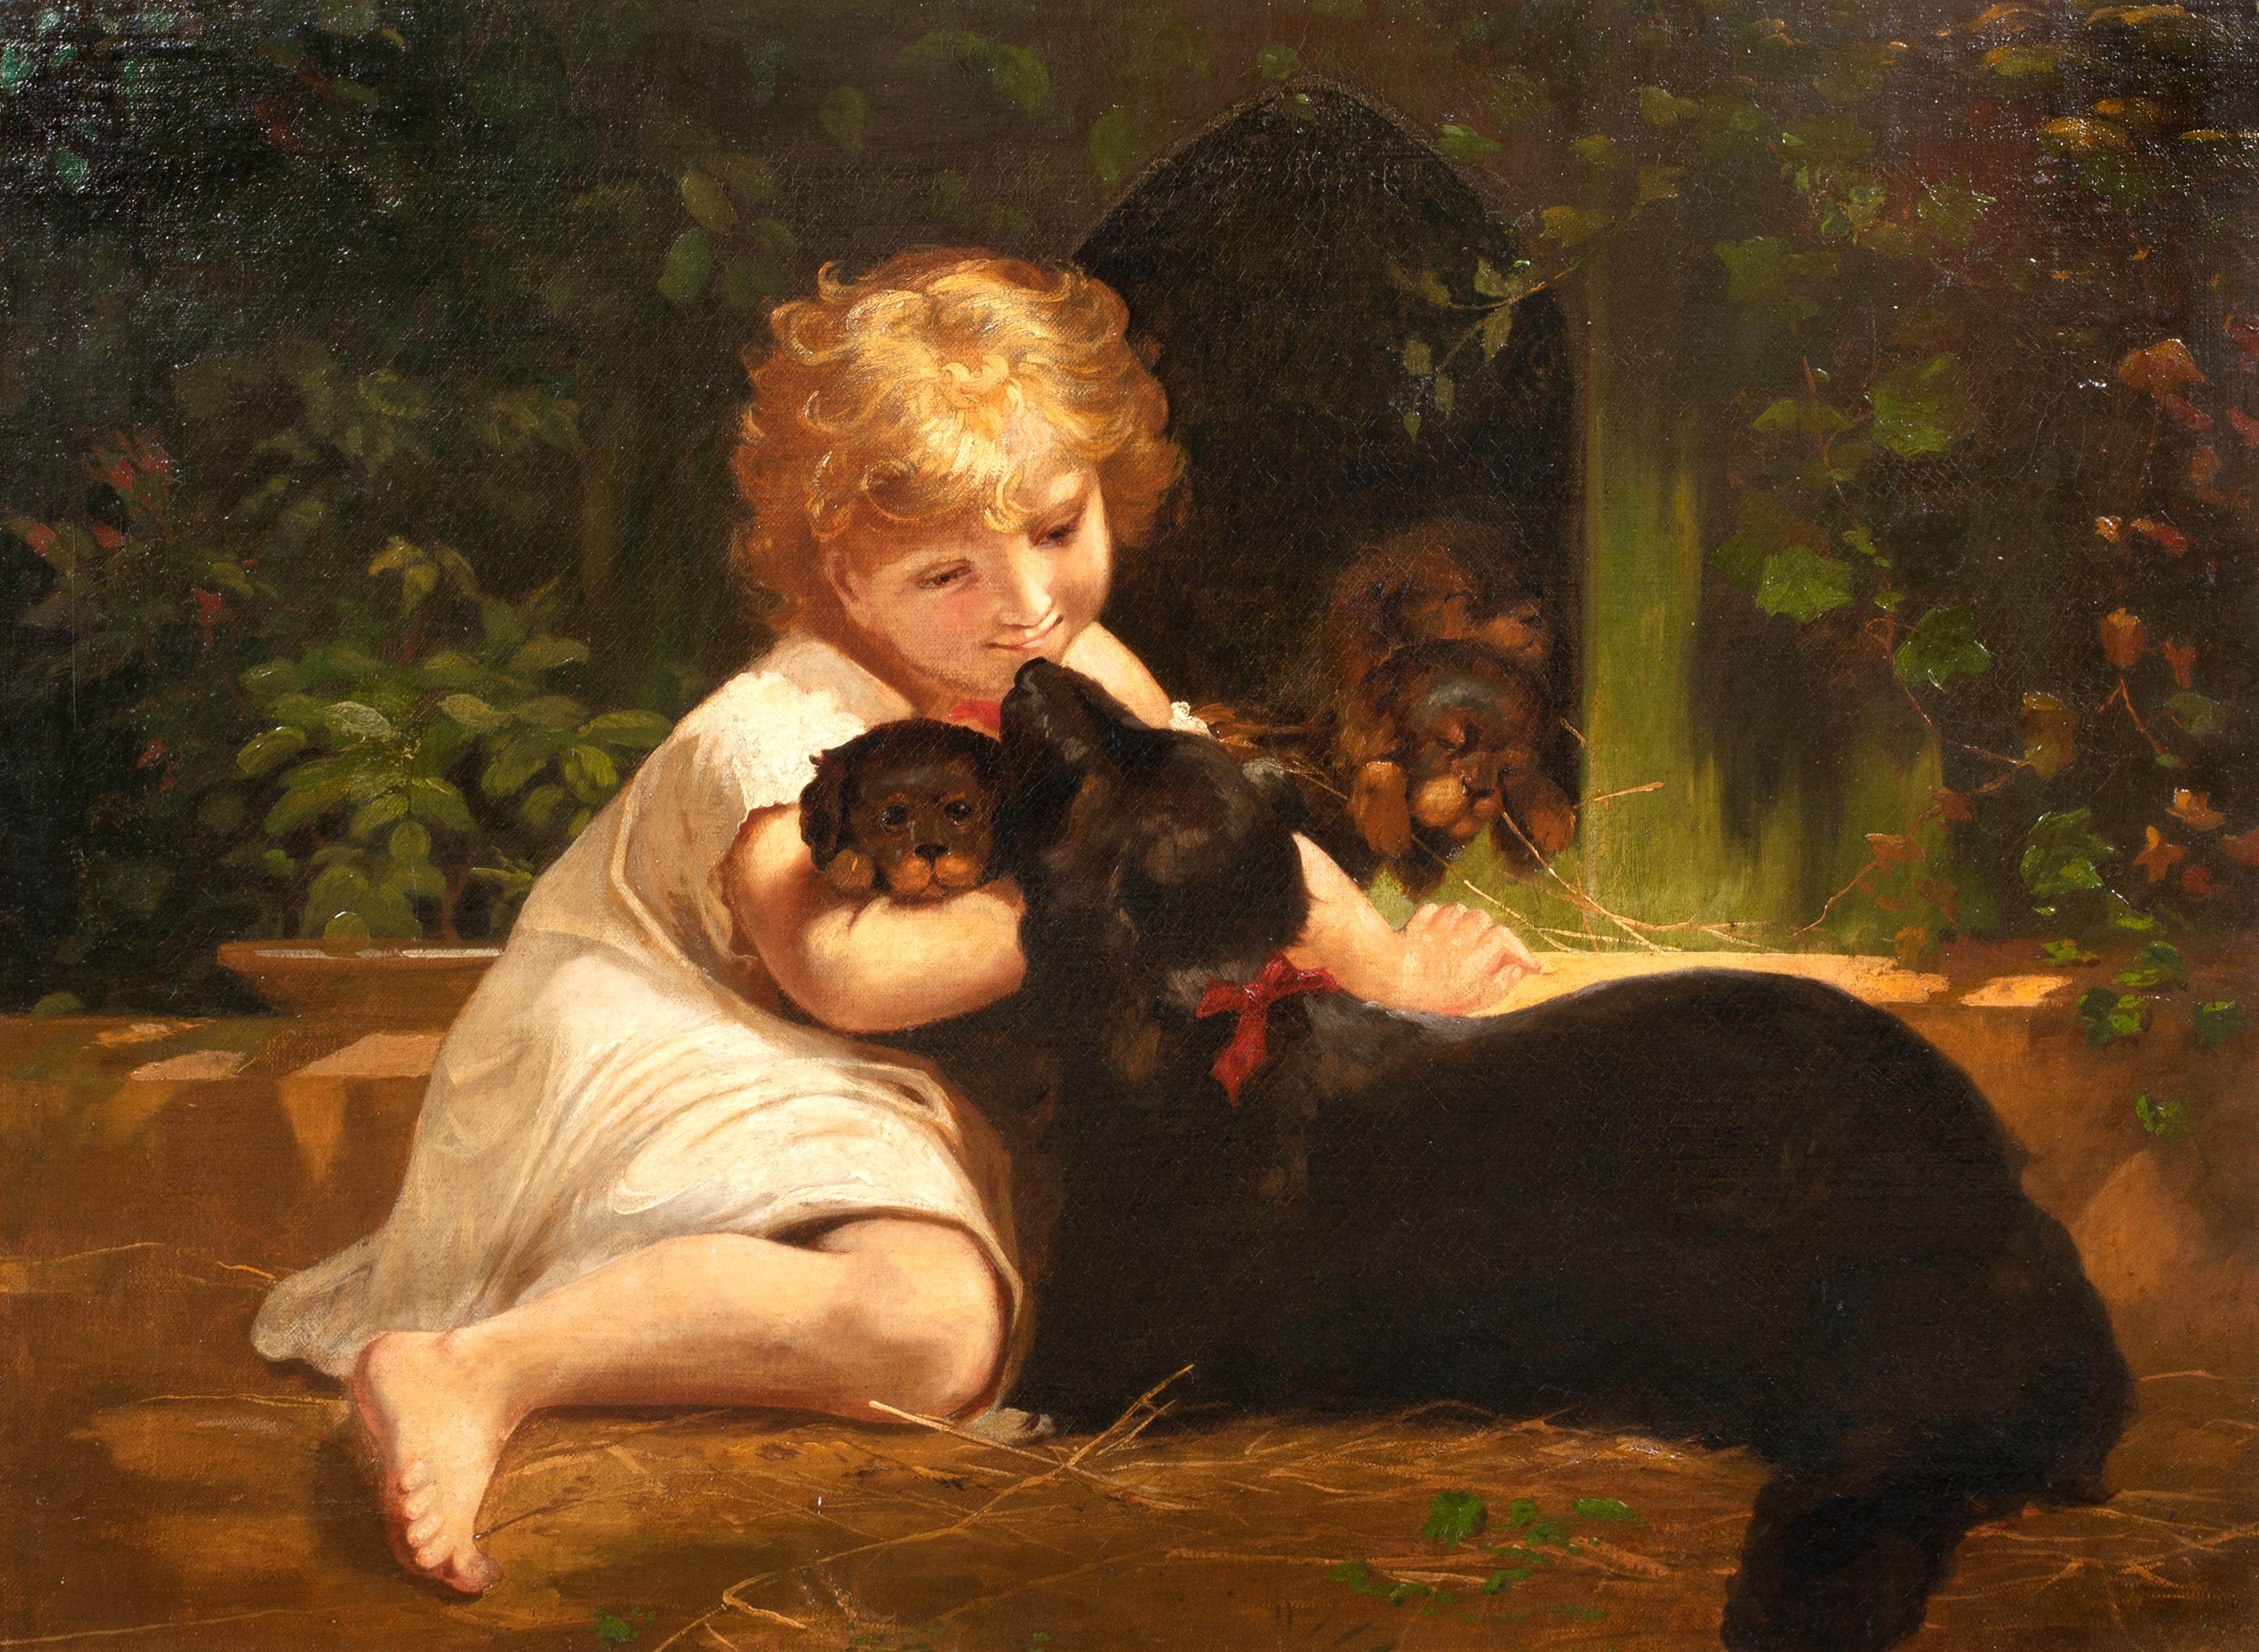 Unknown Portrait Painting - Portrait Of A Girl, Dachshund & Puppies, 19th Century